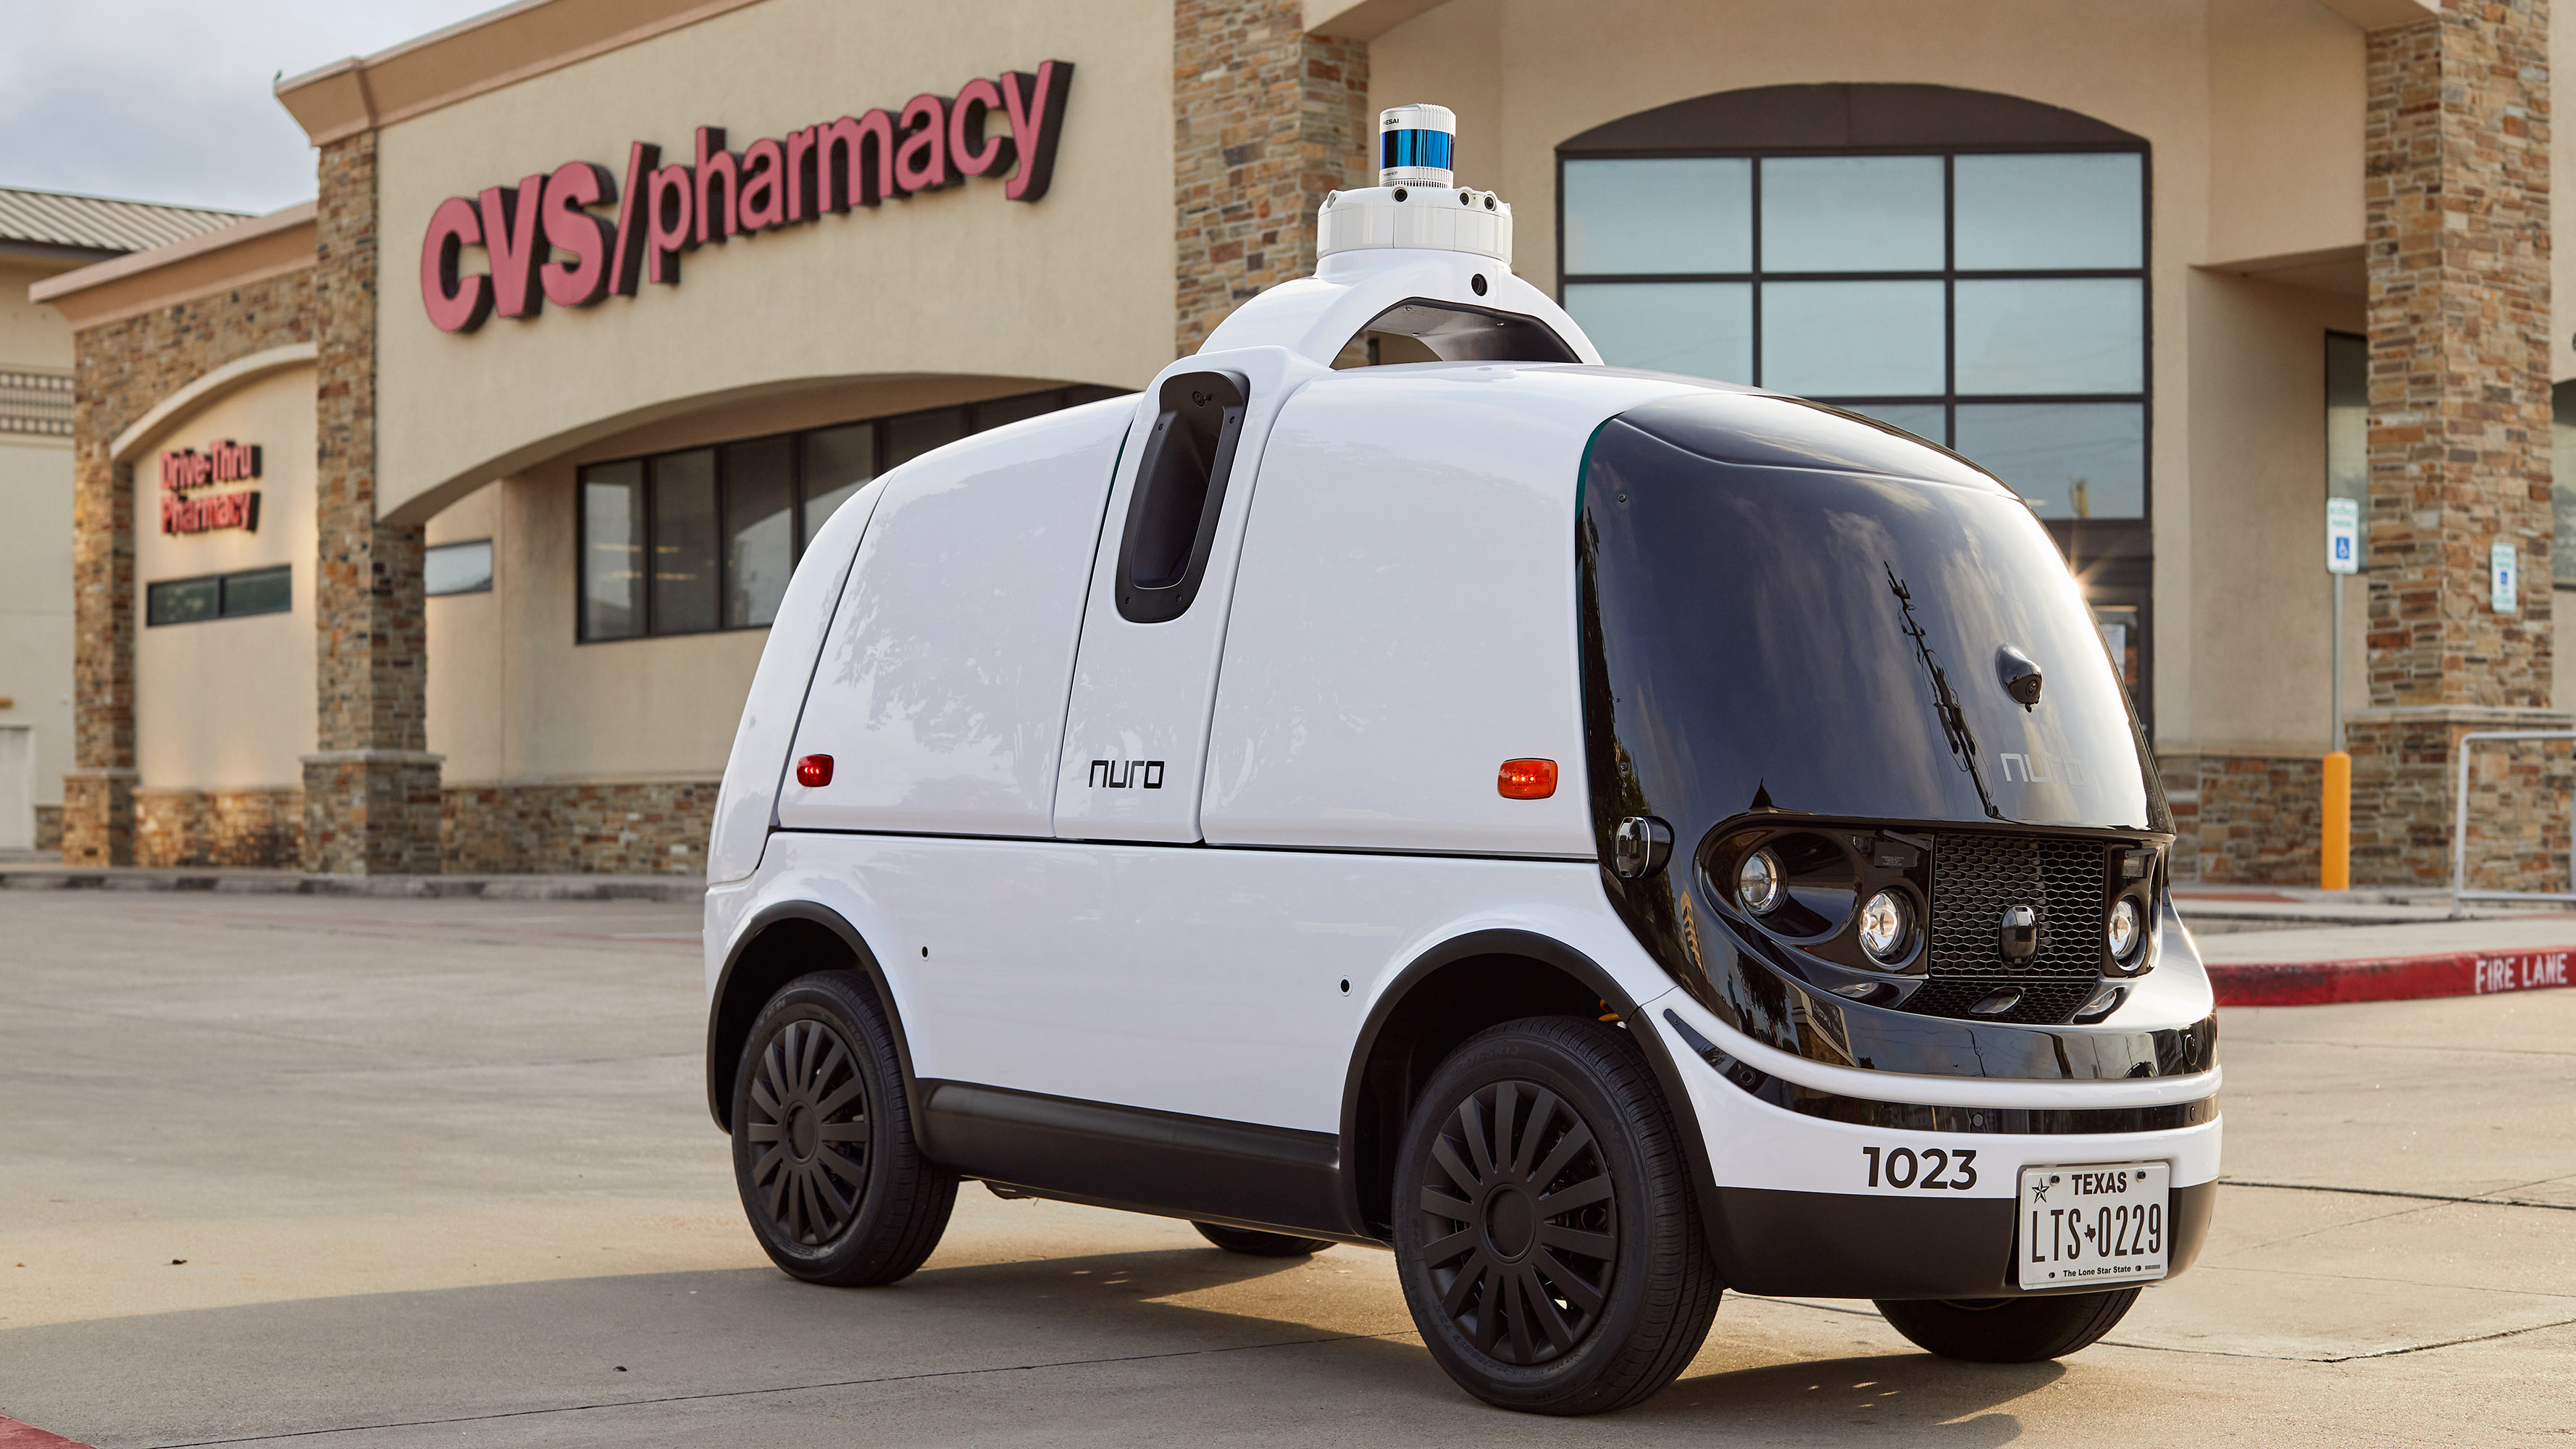 A Nuro autonomous vehicle is parked outside of a CVS Pharmacy location in Texas.